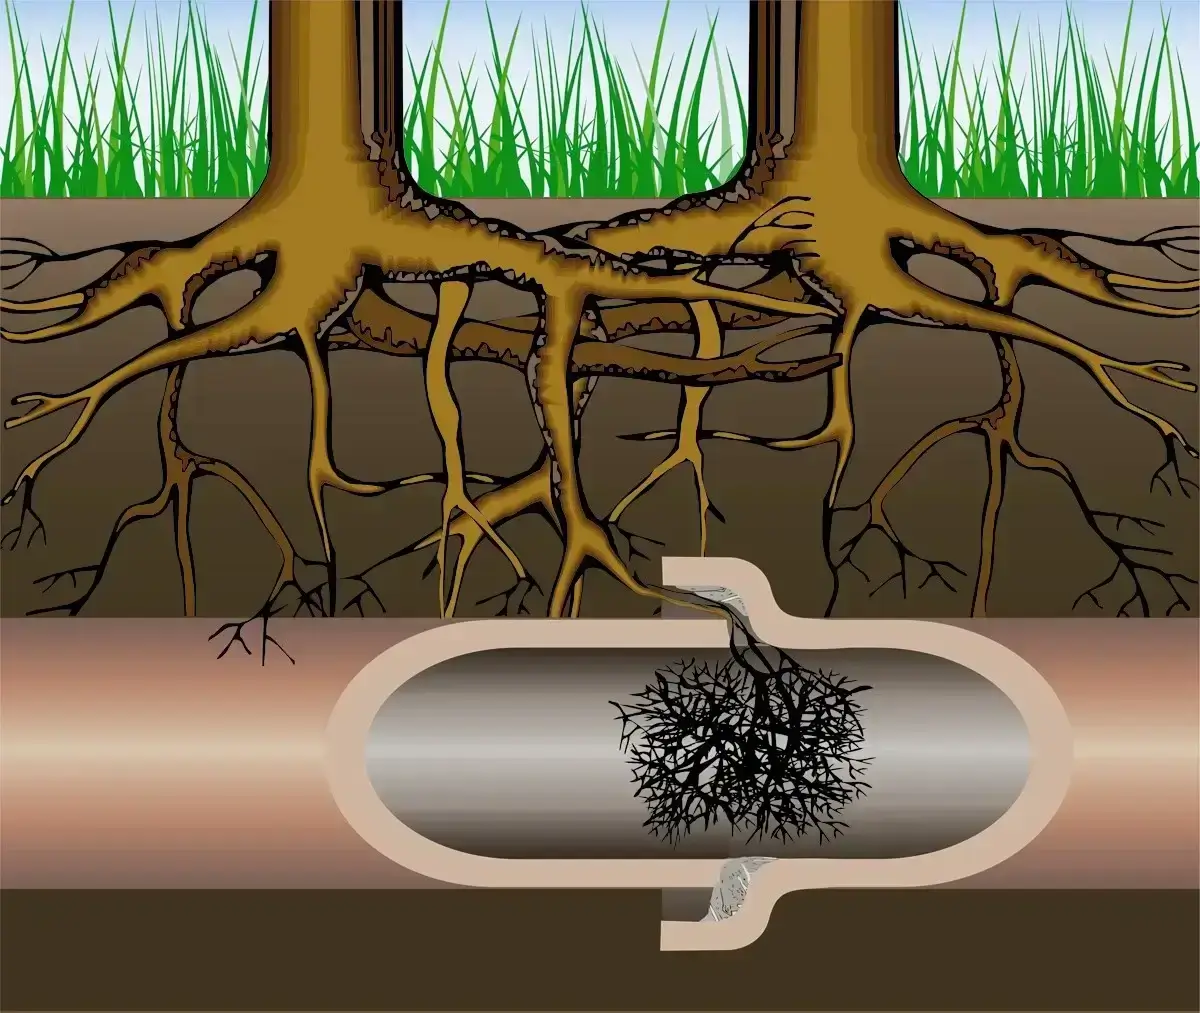 Root Growth in the Sewer Pipes That Is Lining Up and Invading